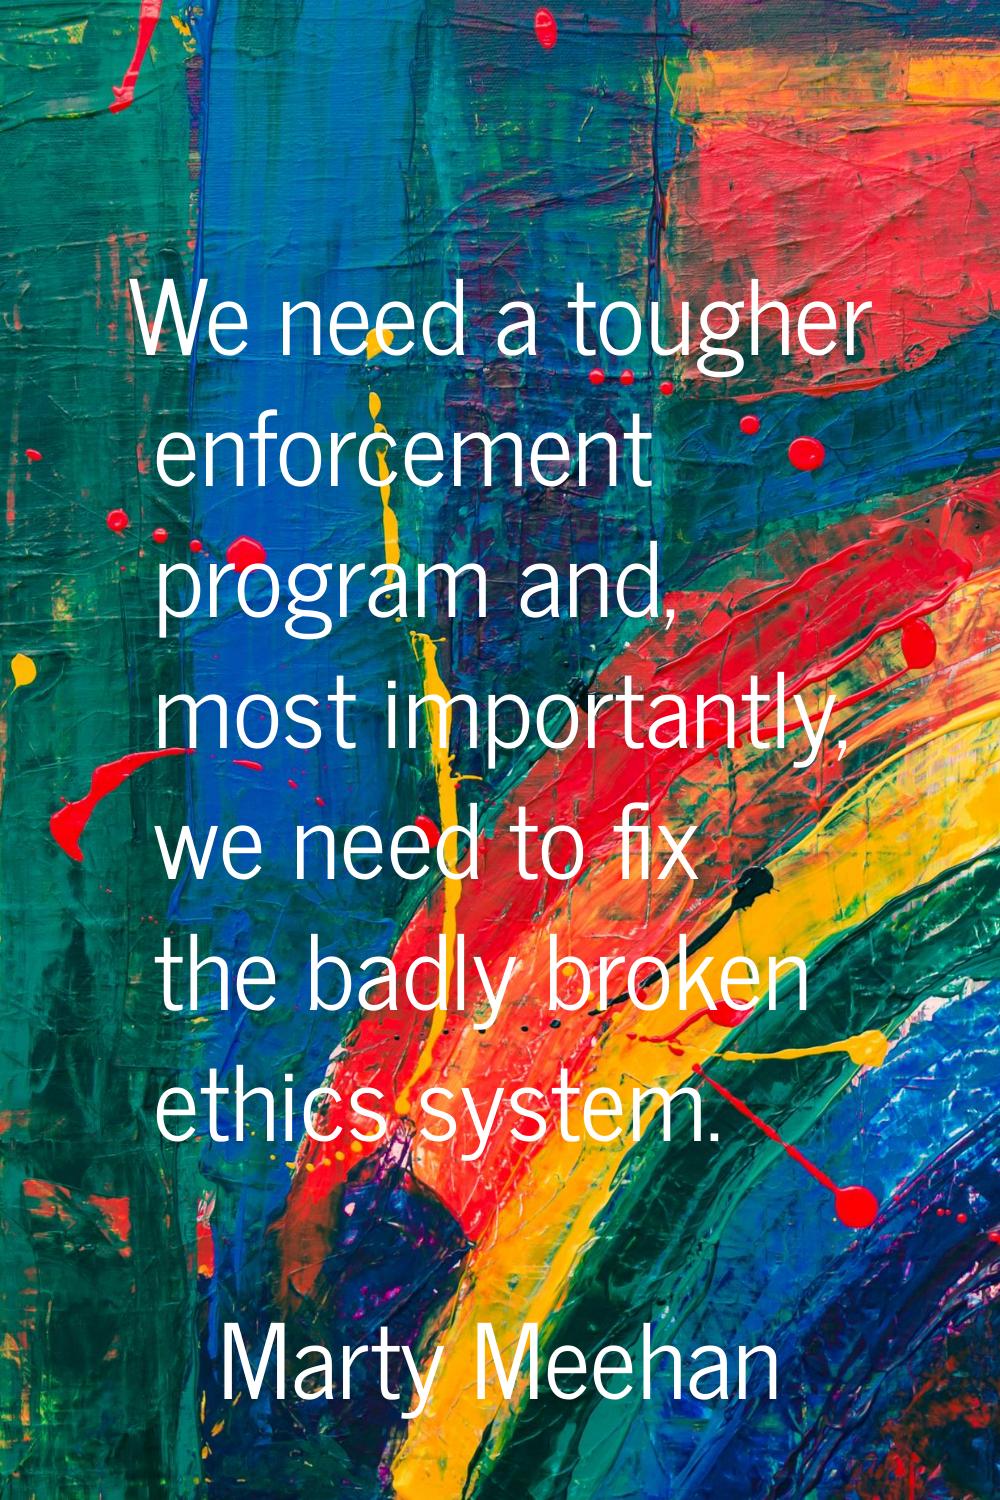 We need a tougher enforcement program and, most importantly, we need to fix the badly broken ethics